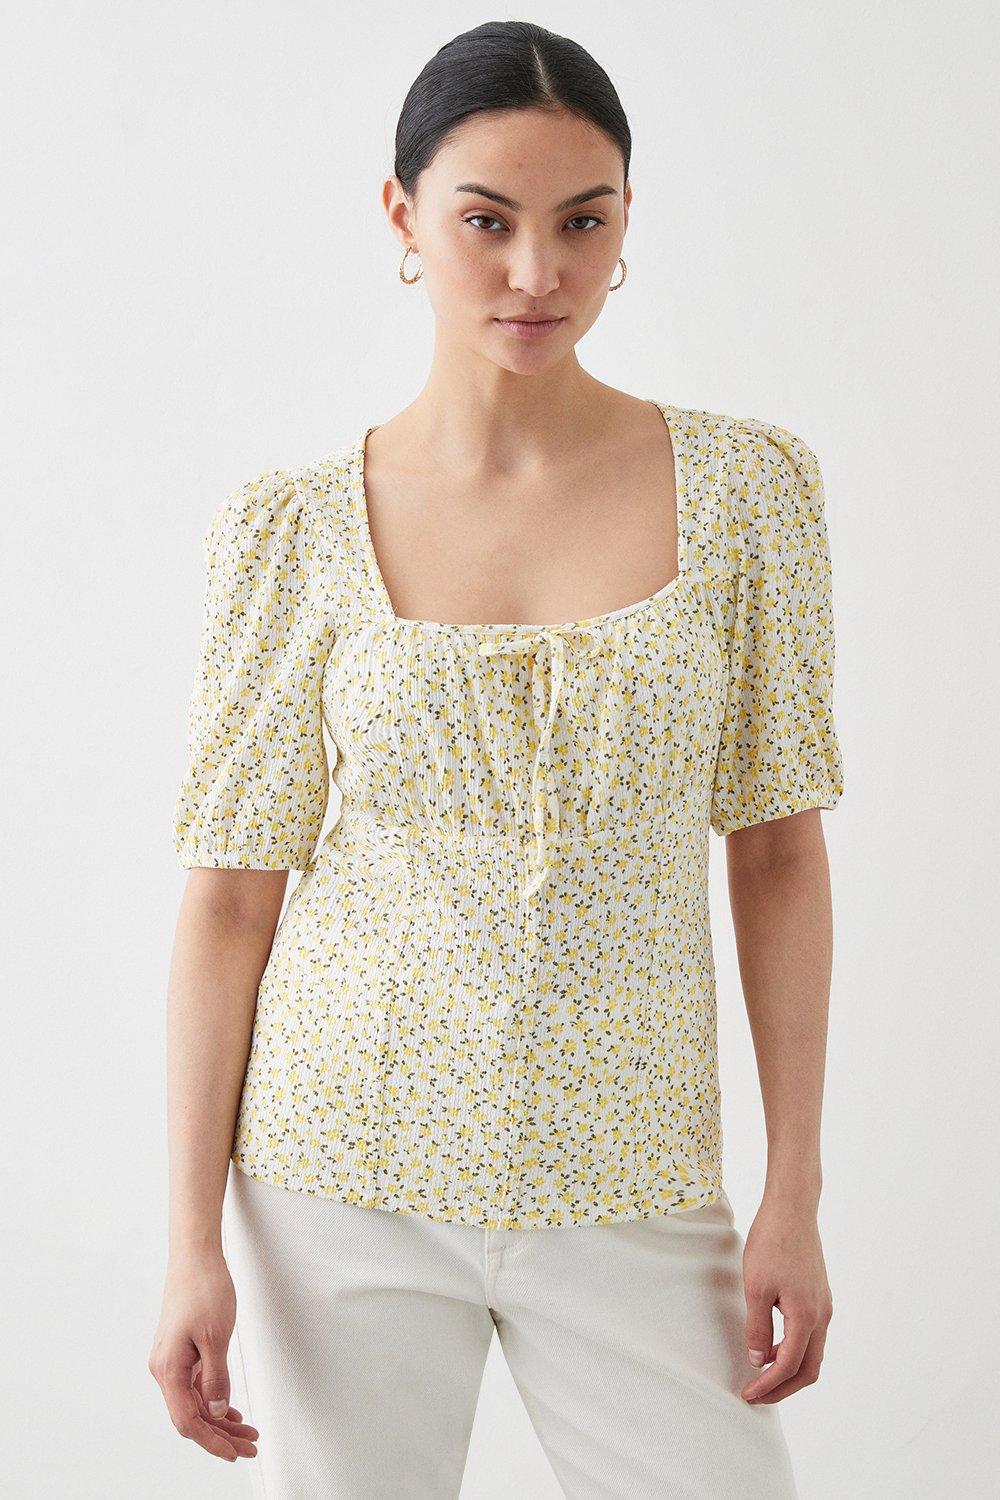 Women’s Petite Puff Sleeve Square Neck Printed Top - yellow - S